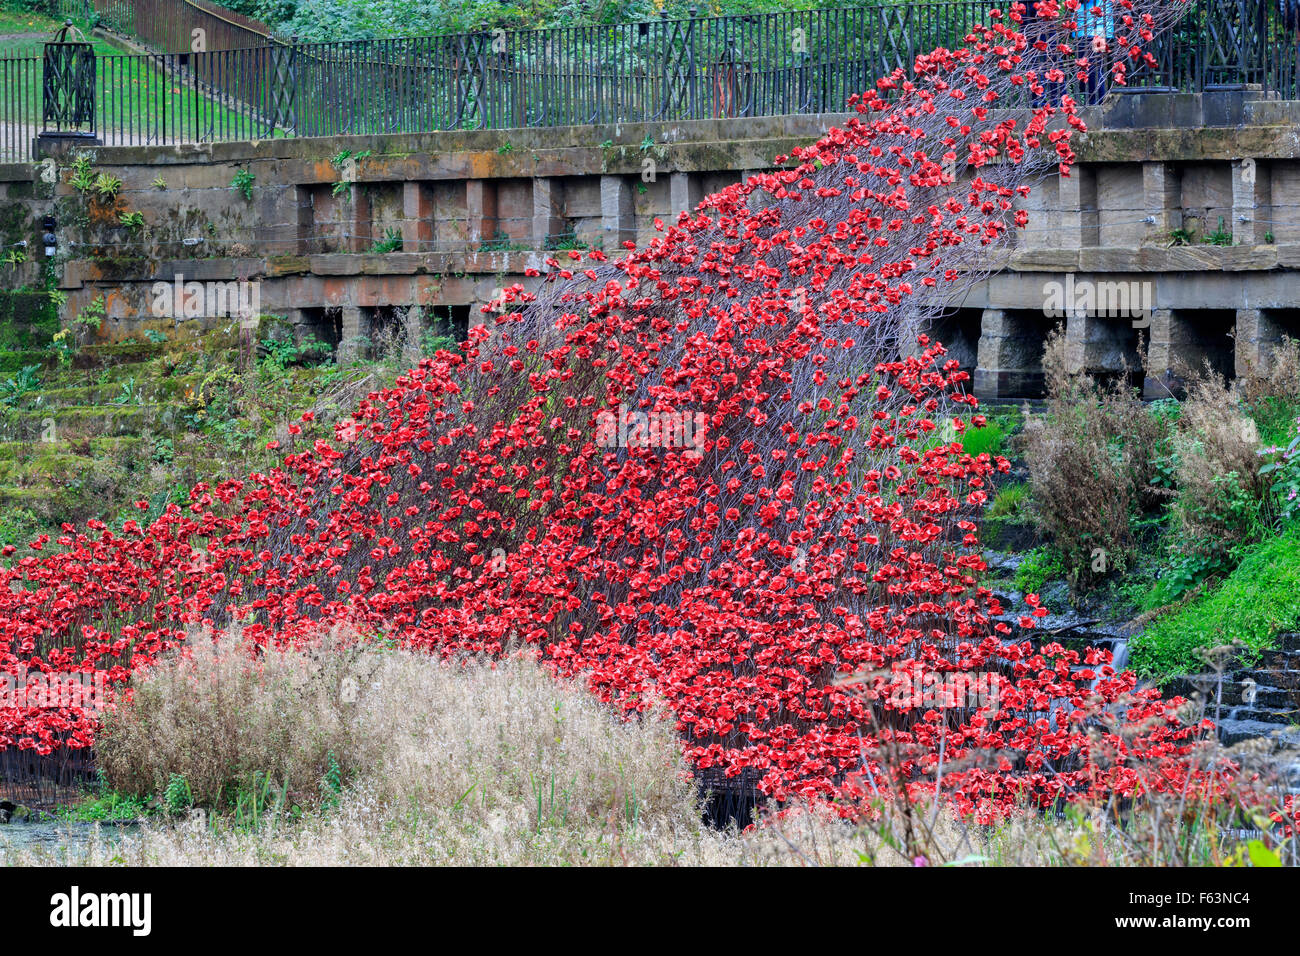 Wakefield, West Yorkshire, UNITED KINGDOM - 16th october, 2015: Red Ceramic Poppies 'Wave' exhibition of Tower of London poppies Stock Photo